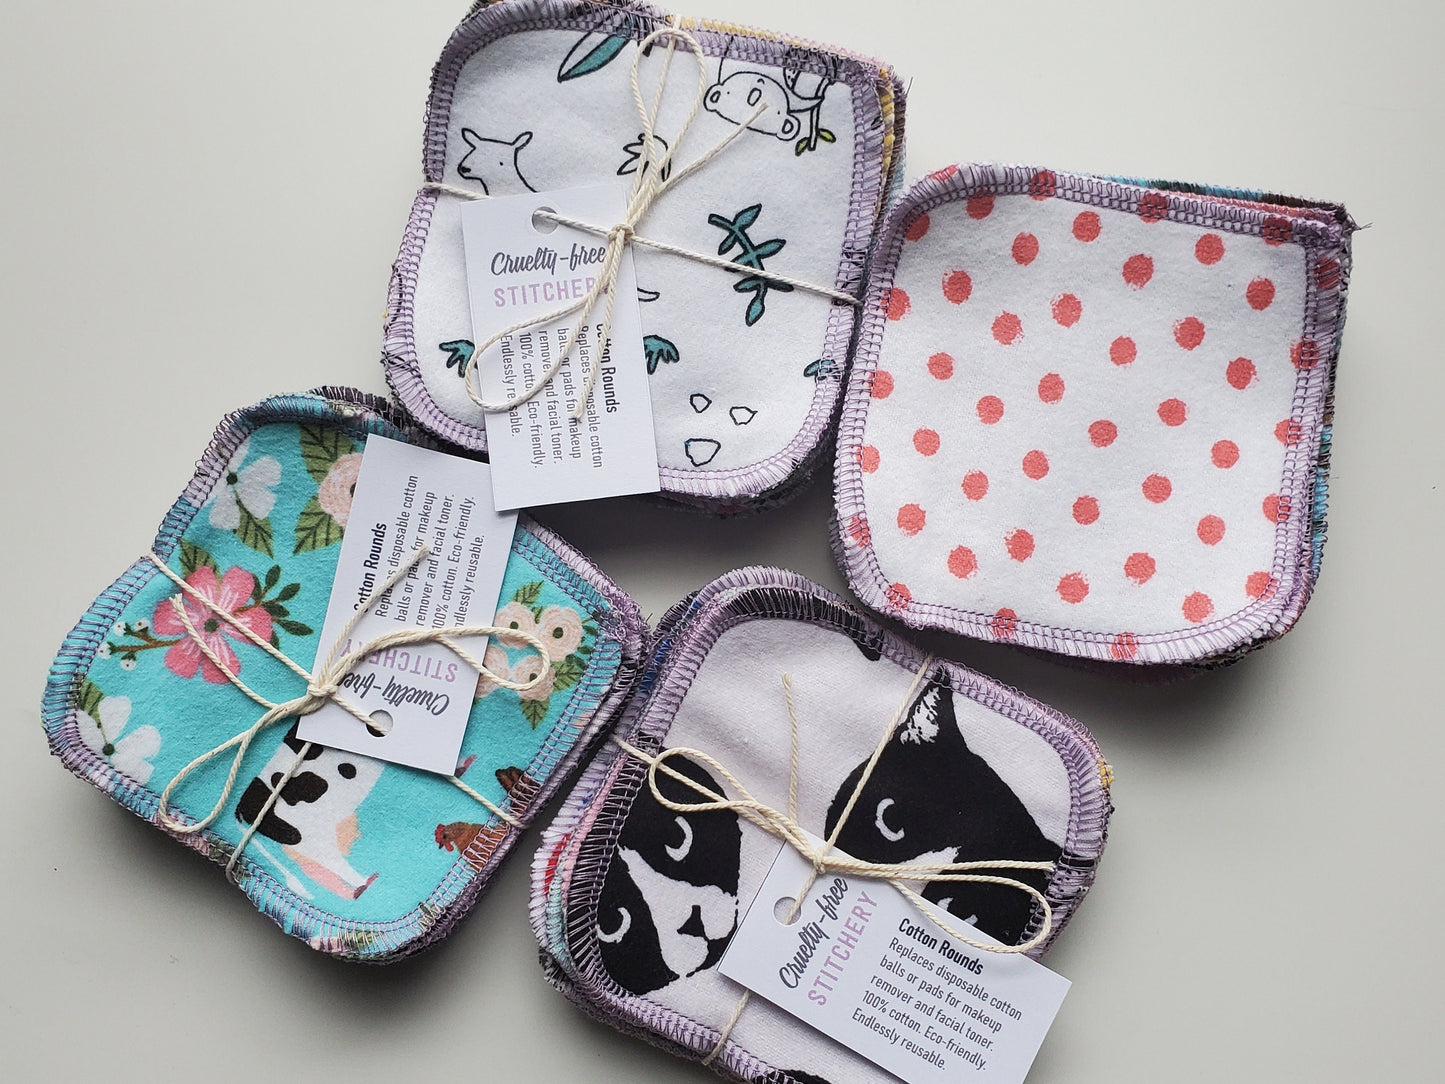 Four bundled packs of assorted print reusable cotton rounds tied with string and a small white tag.